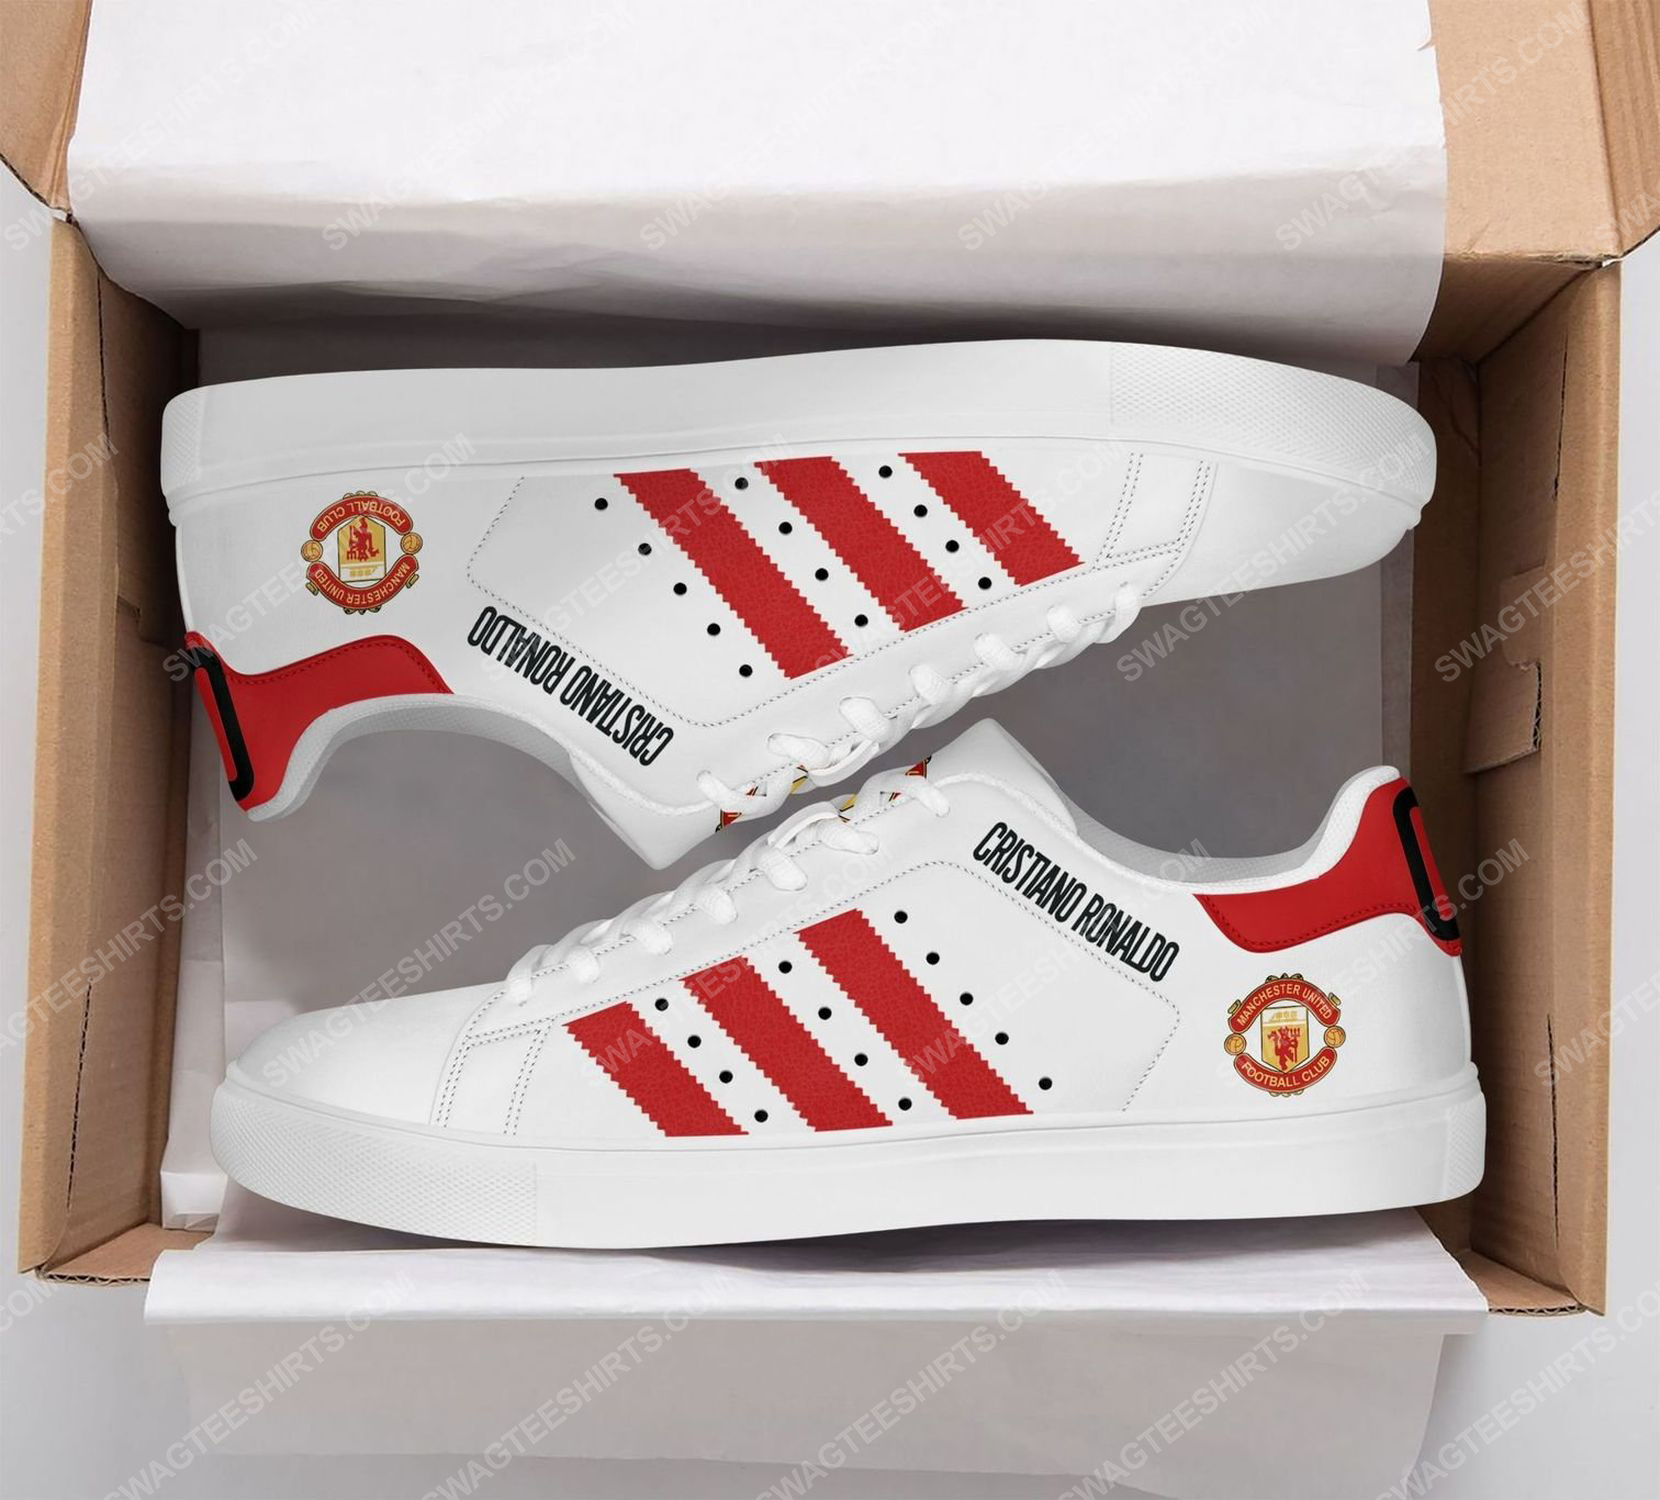 Manchester united cr7 stan smith shoes 2